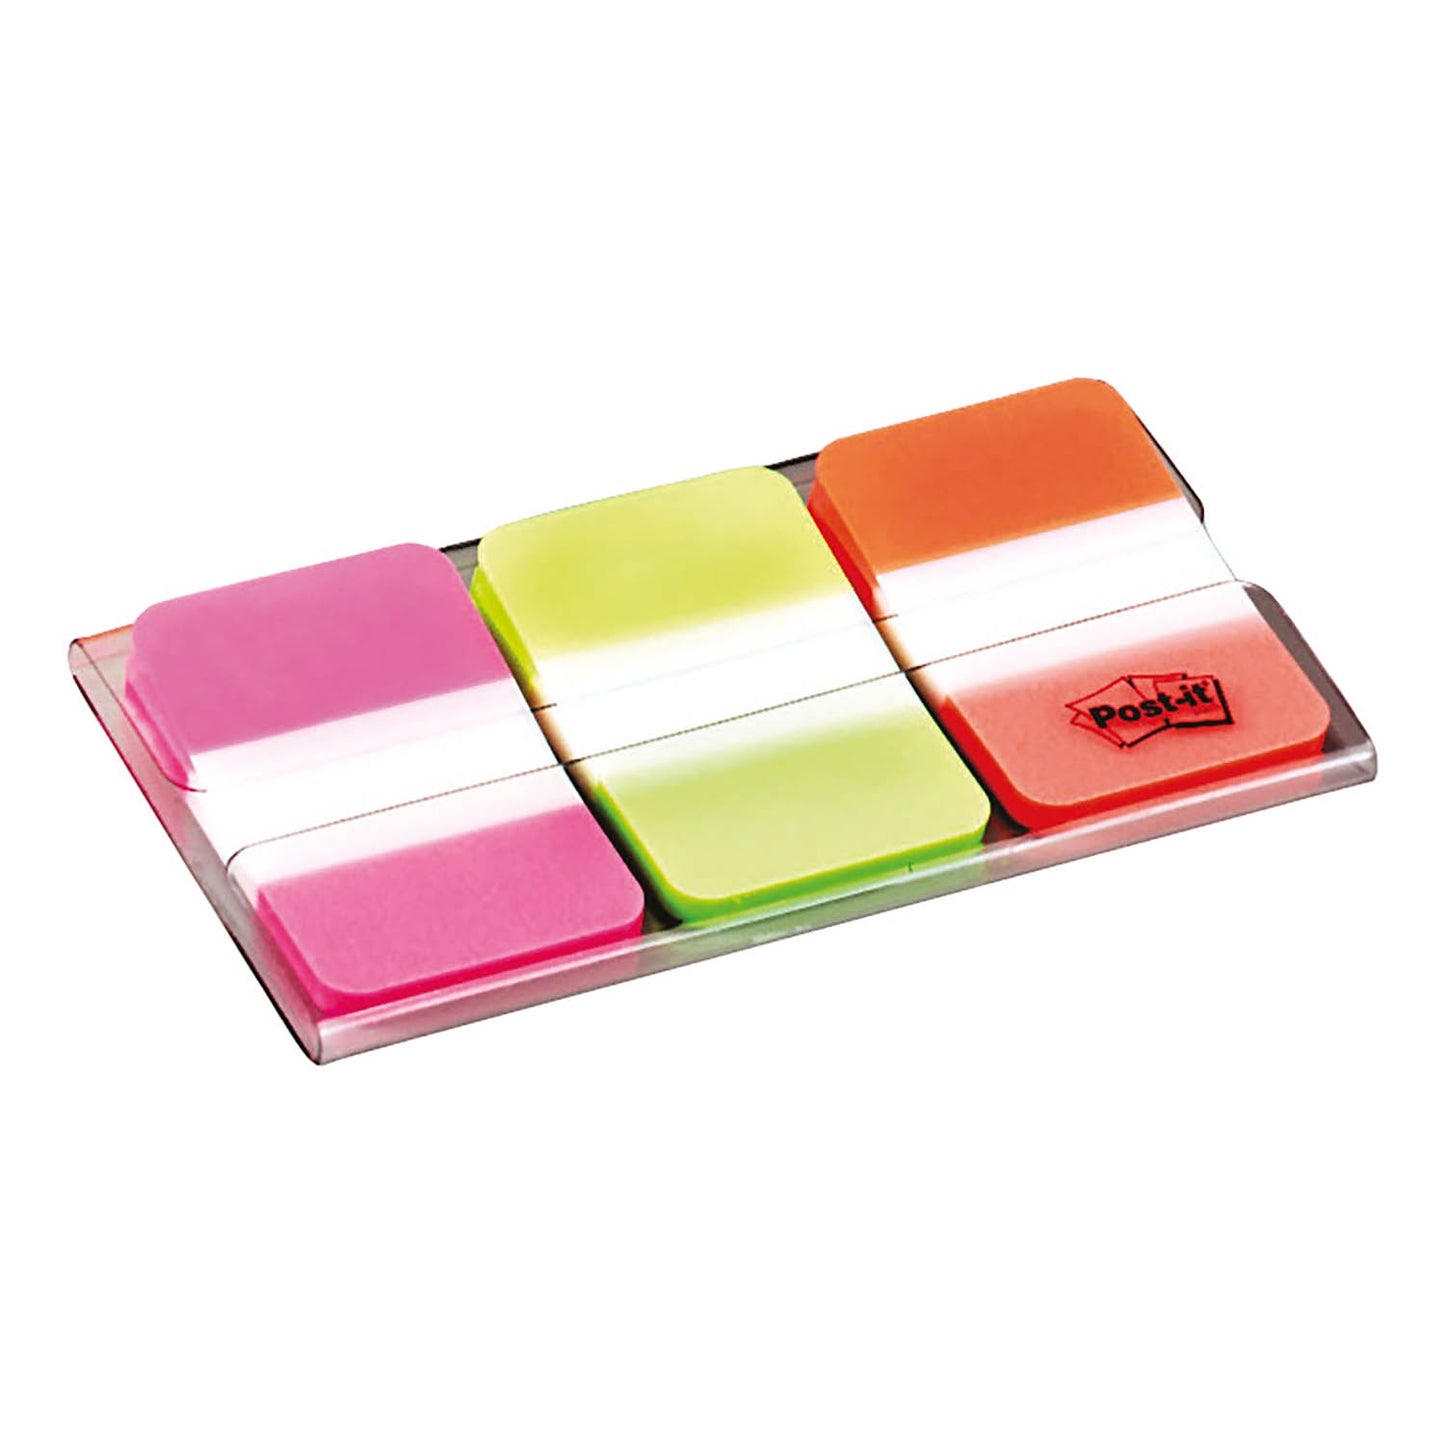 Post-it Strong Index Full Pink/Green/Orange (Pack of 66)